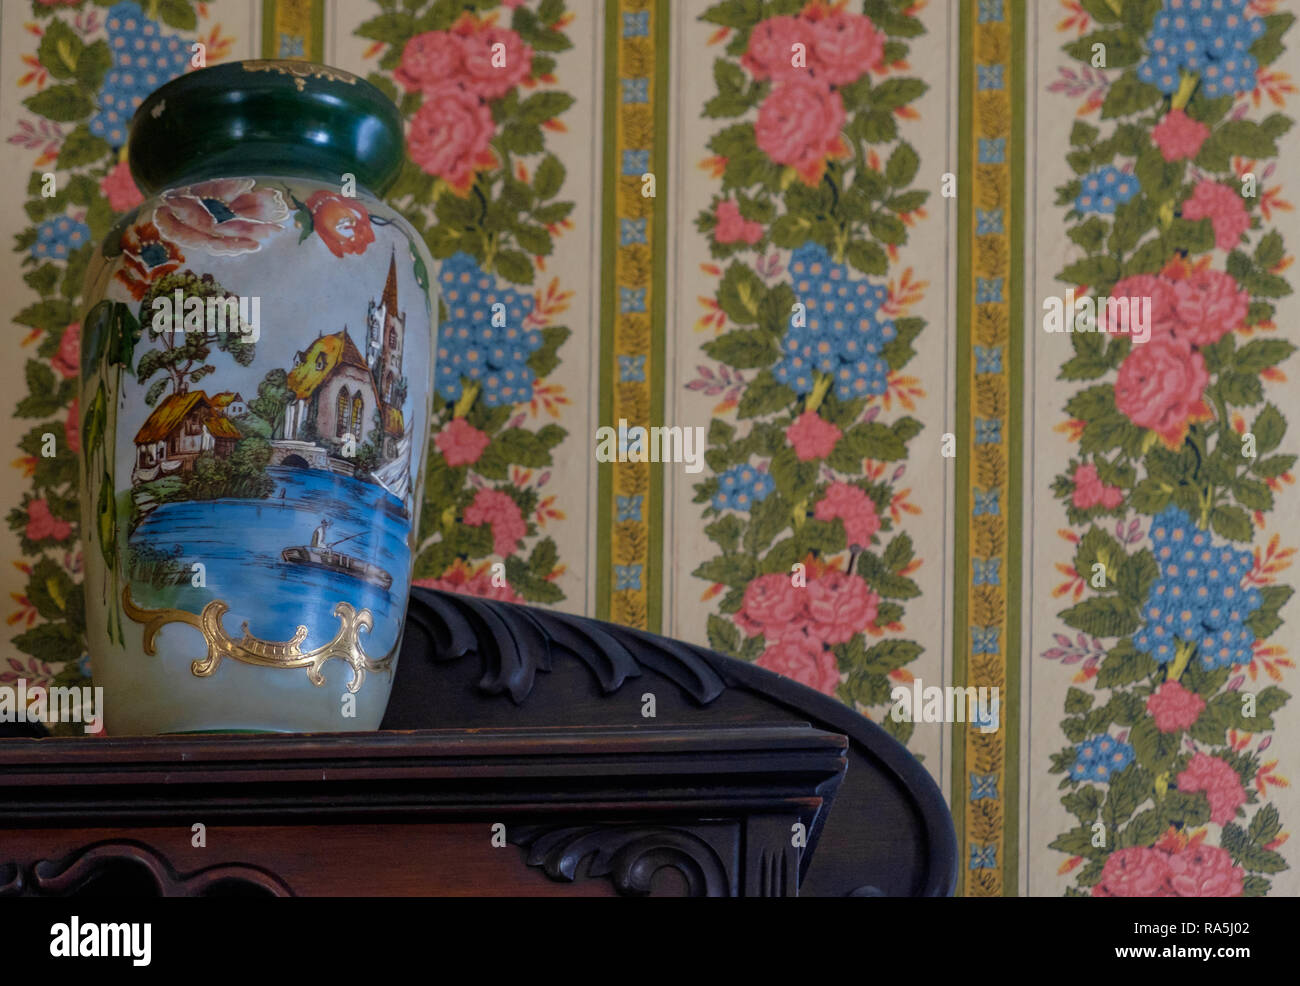 Antique decorative flower vase & pink & blue vintage floral wall paper. Interior of old Texan home, Chestnut Square, Historic Village, McKinney Texas. Stock Photo